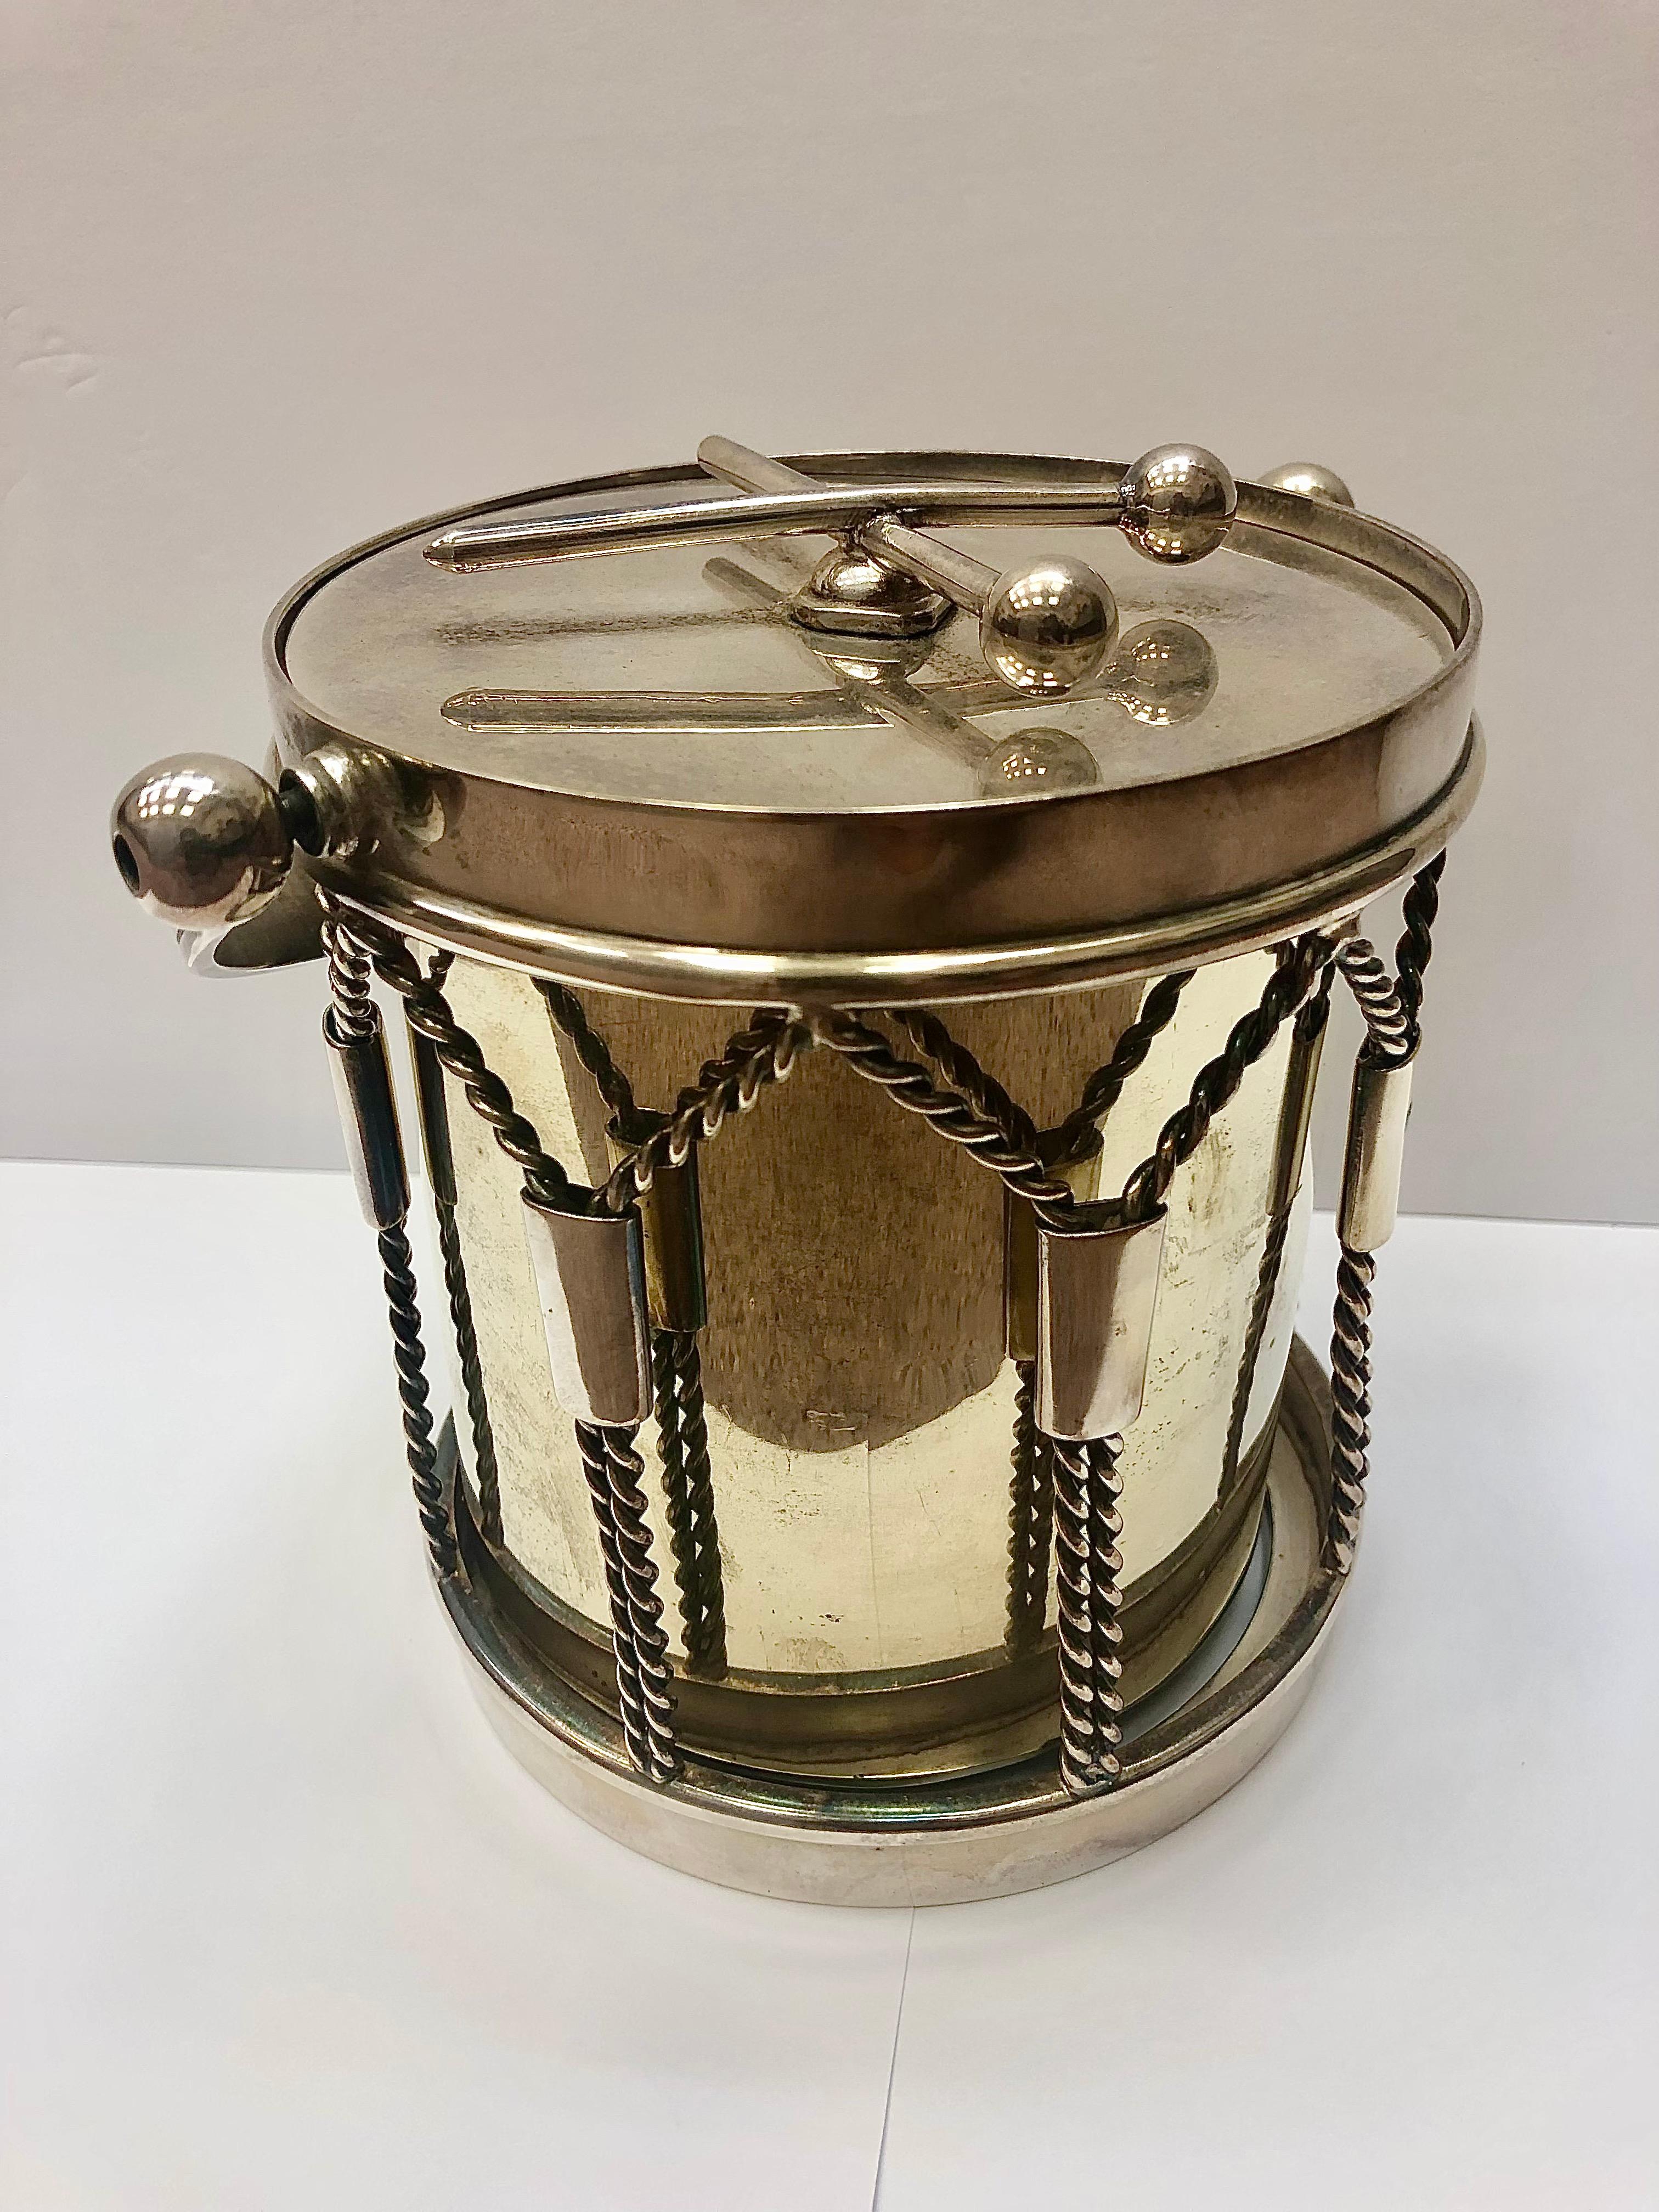 Amazing antique 19th century Victorian silver plated ice bucket in the form of a drum. Removable lid with a pair of drumsticks and twisted rope down the sides. A truly special find for any musician.